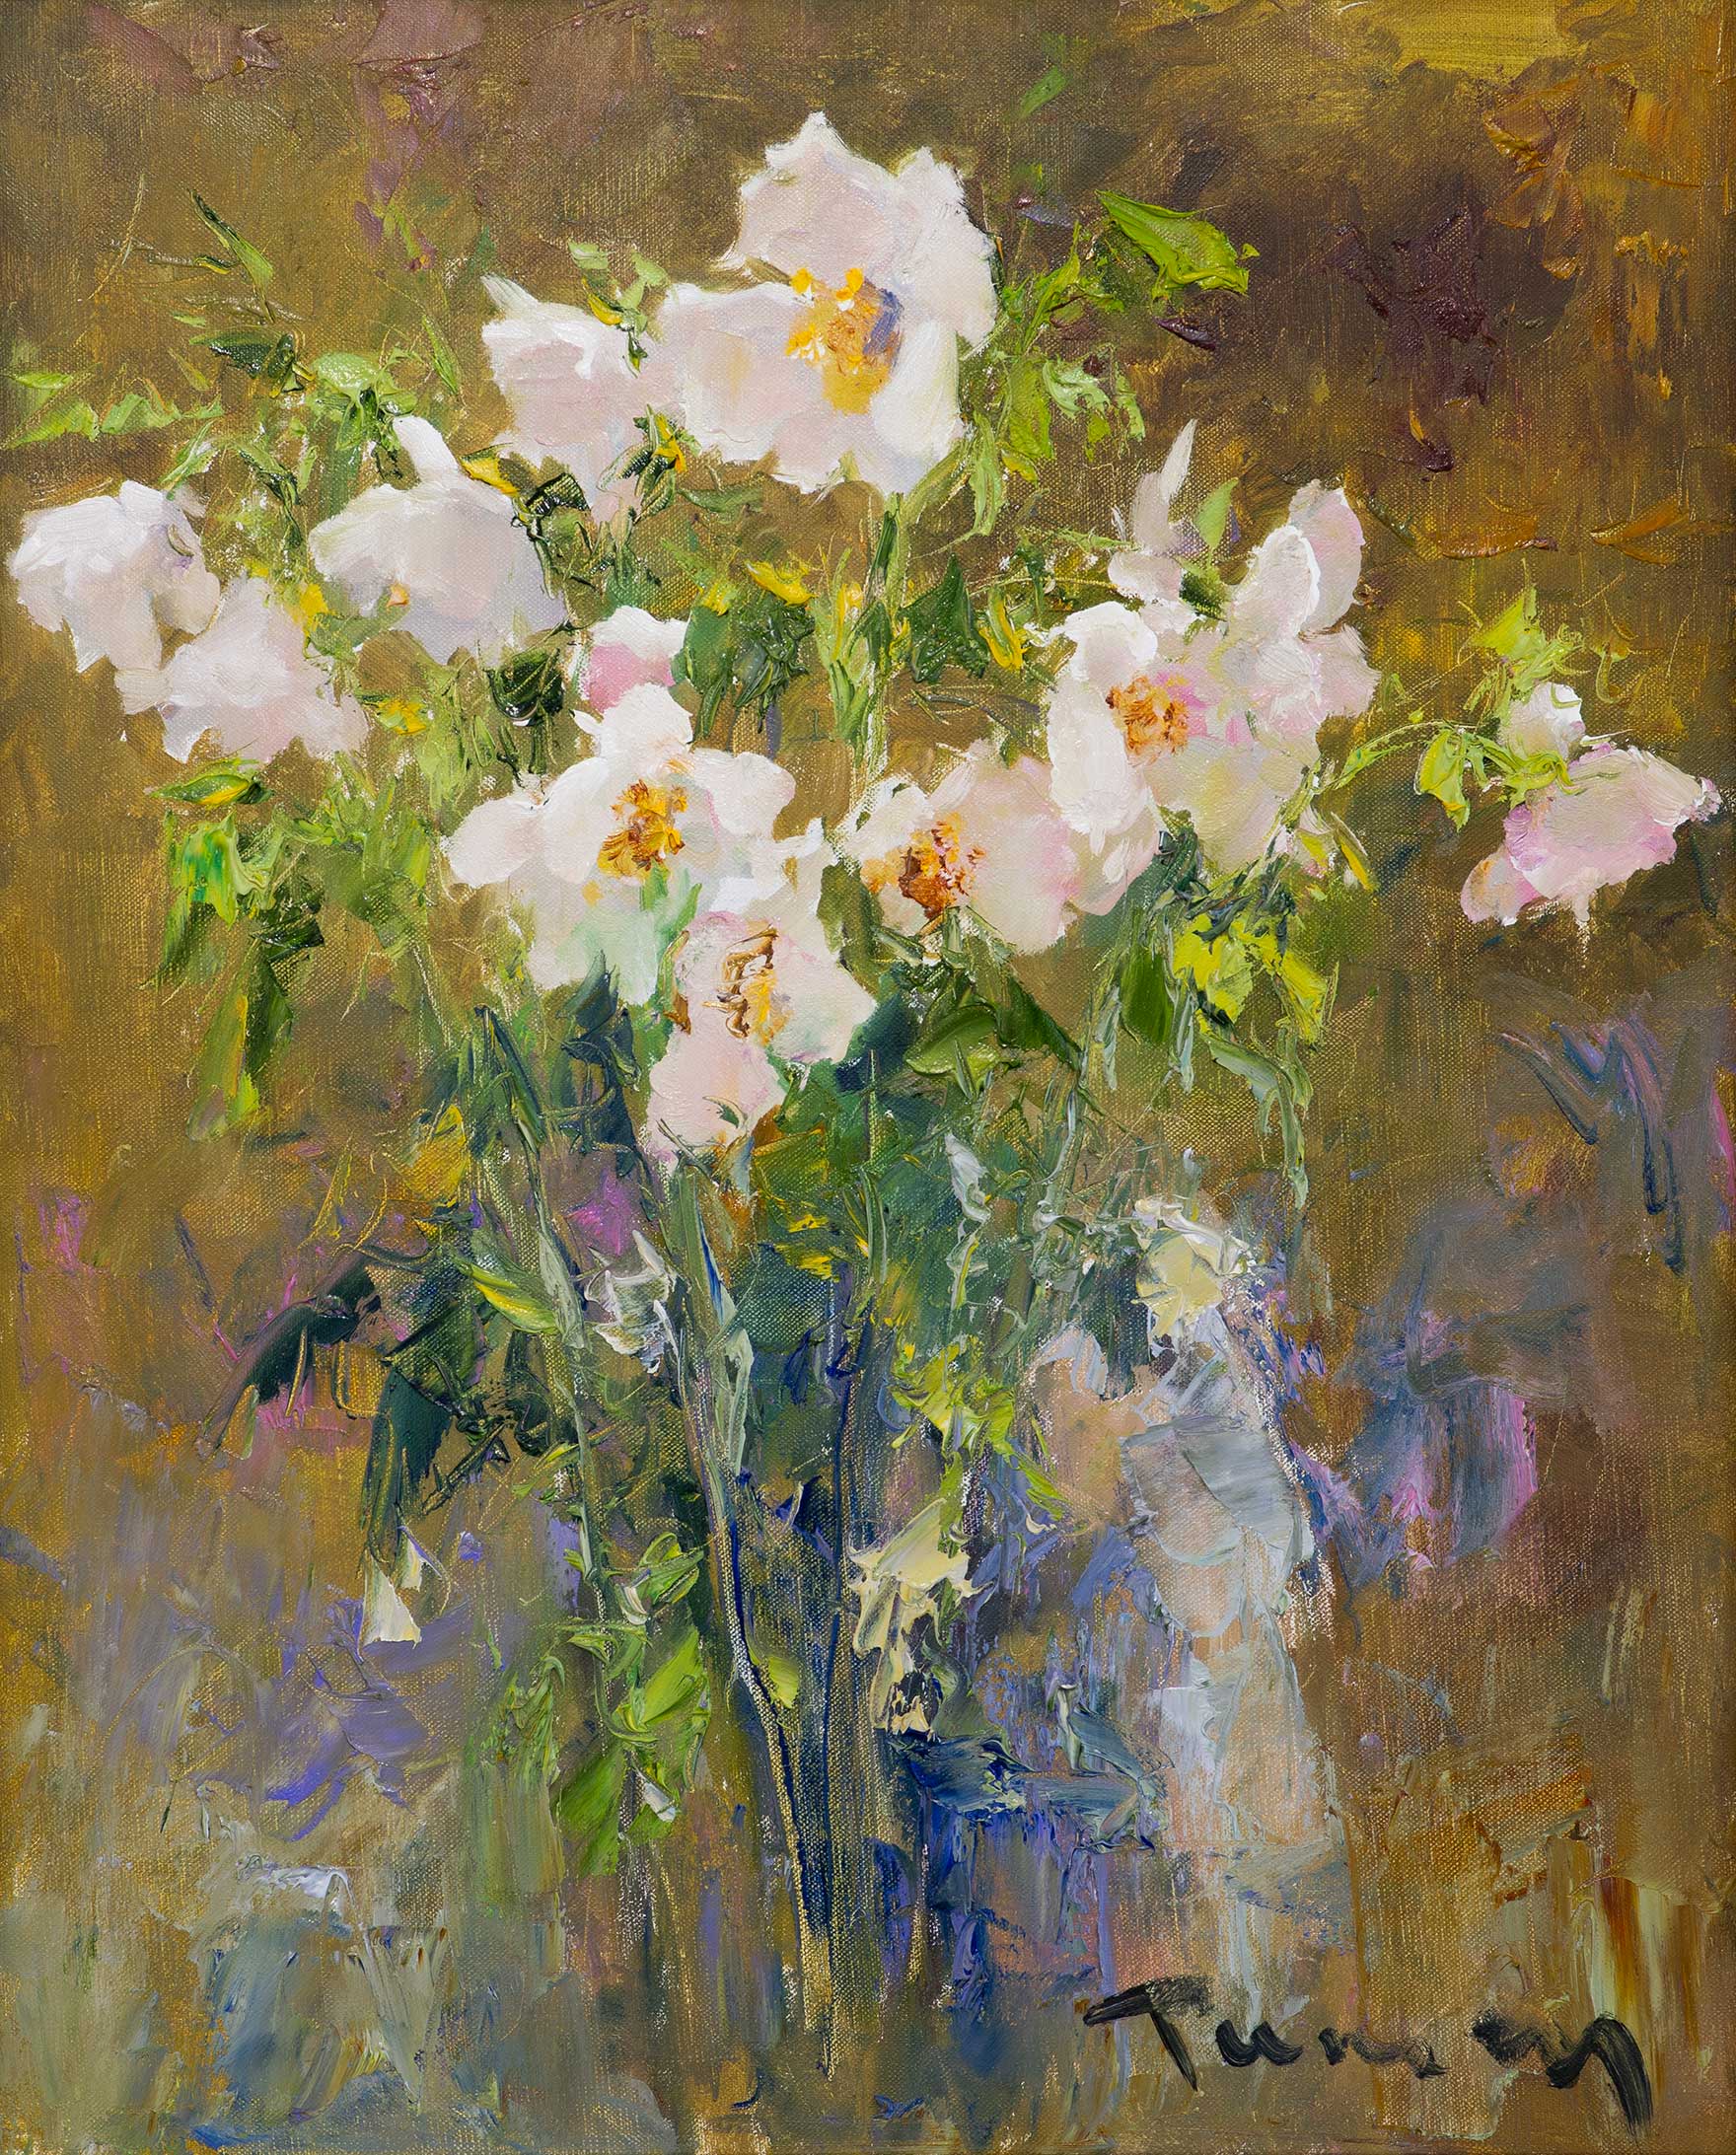 Pureness - 1, Tuman Zhumabaev, Buy the painting Oil